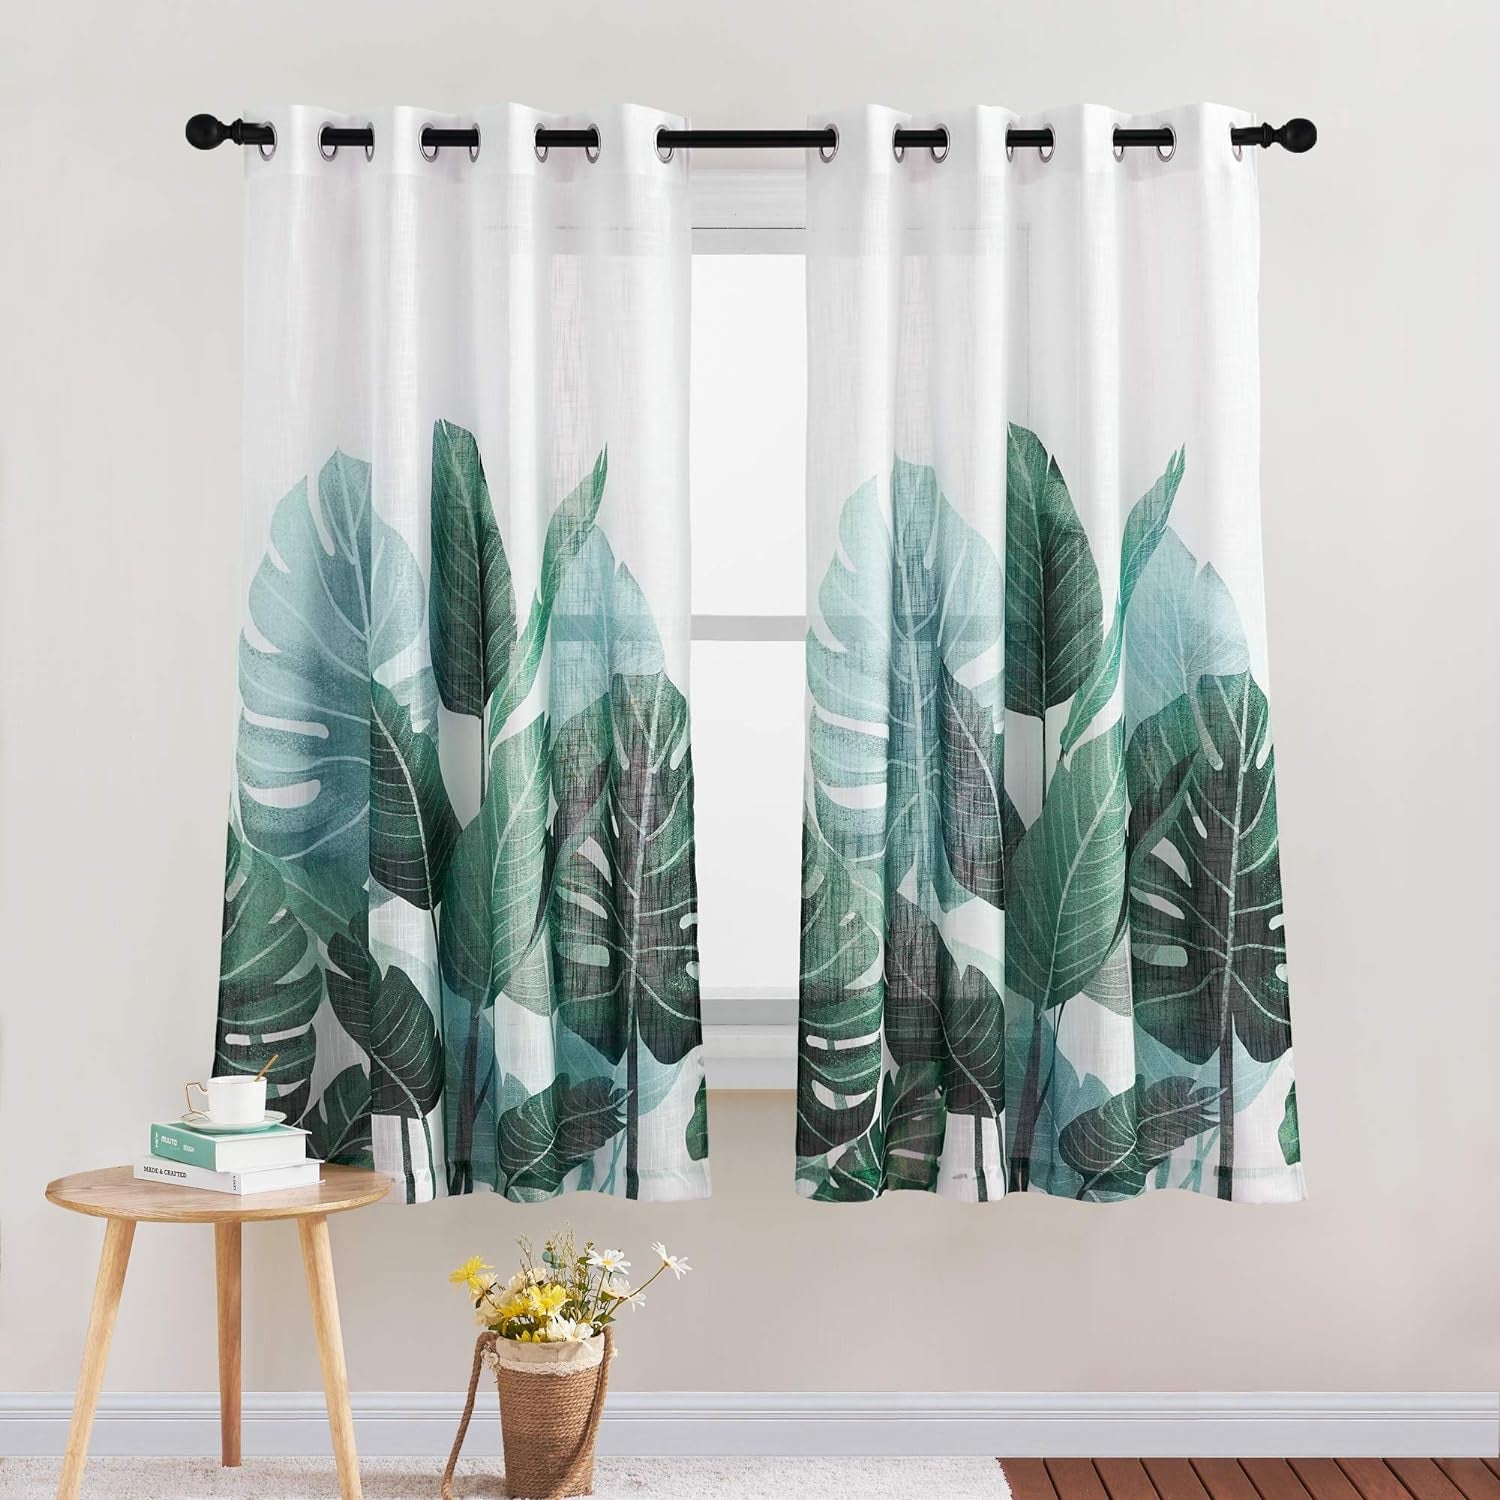 KGORGE Blackout Curtains for Bedroom, Farmhouse Tripical Leaves Pattern Curtains & Drapes Insulating Privacy Window Treatment for Dining Living Room Office Studio, W52 X L63 Inch, 2 Panels  KGORGE Linen W50 X L63 | Pair 